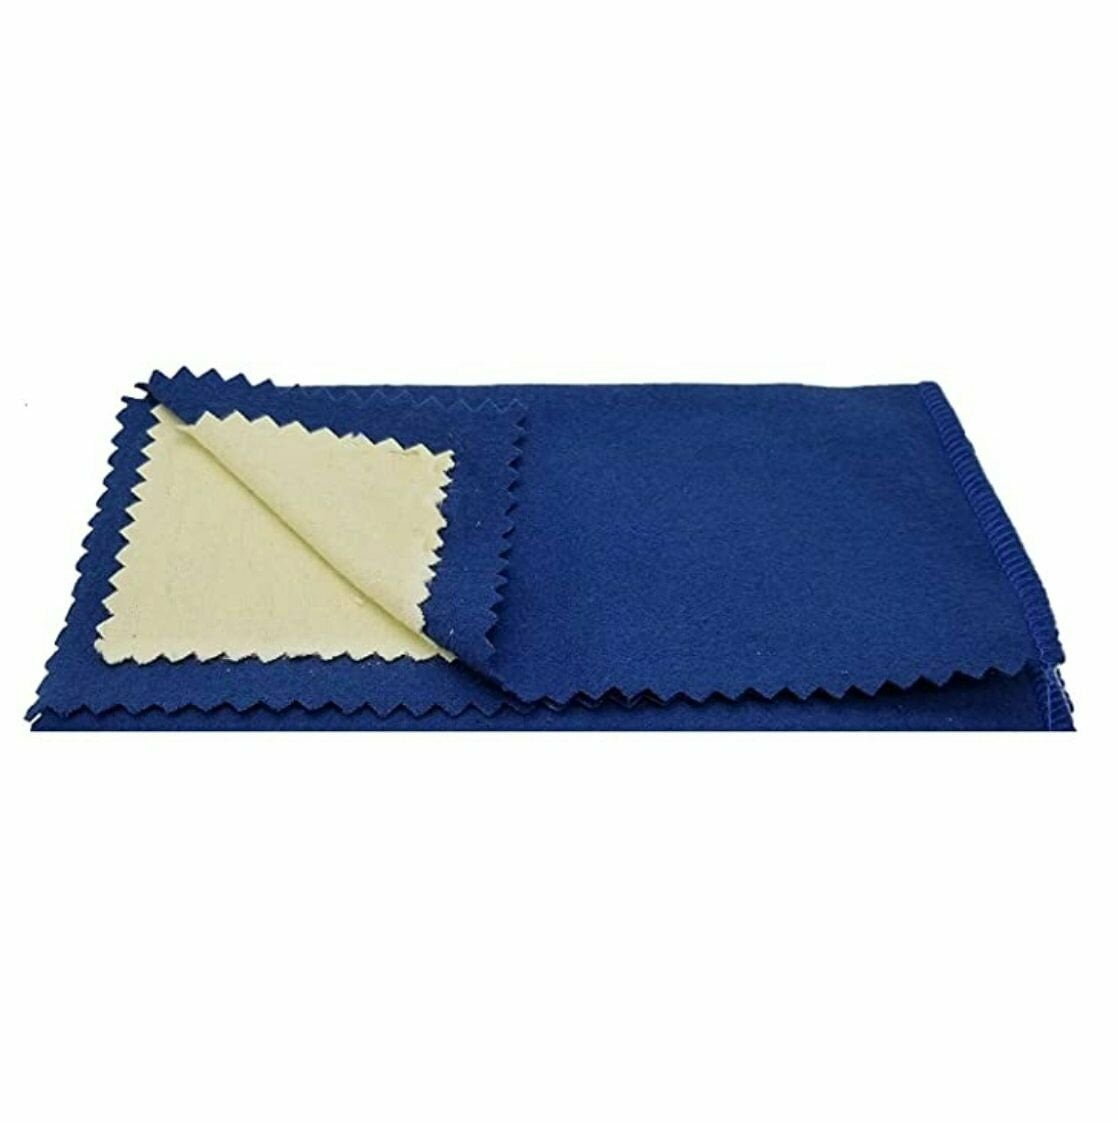 Jewelry Cloth, Silver Cleaner, Polishing Cloth, Polishing Clothes, Sunshine  Cloth, Blue Sunshine Cloth, Cleaning Compound, Jewelry Cleaner